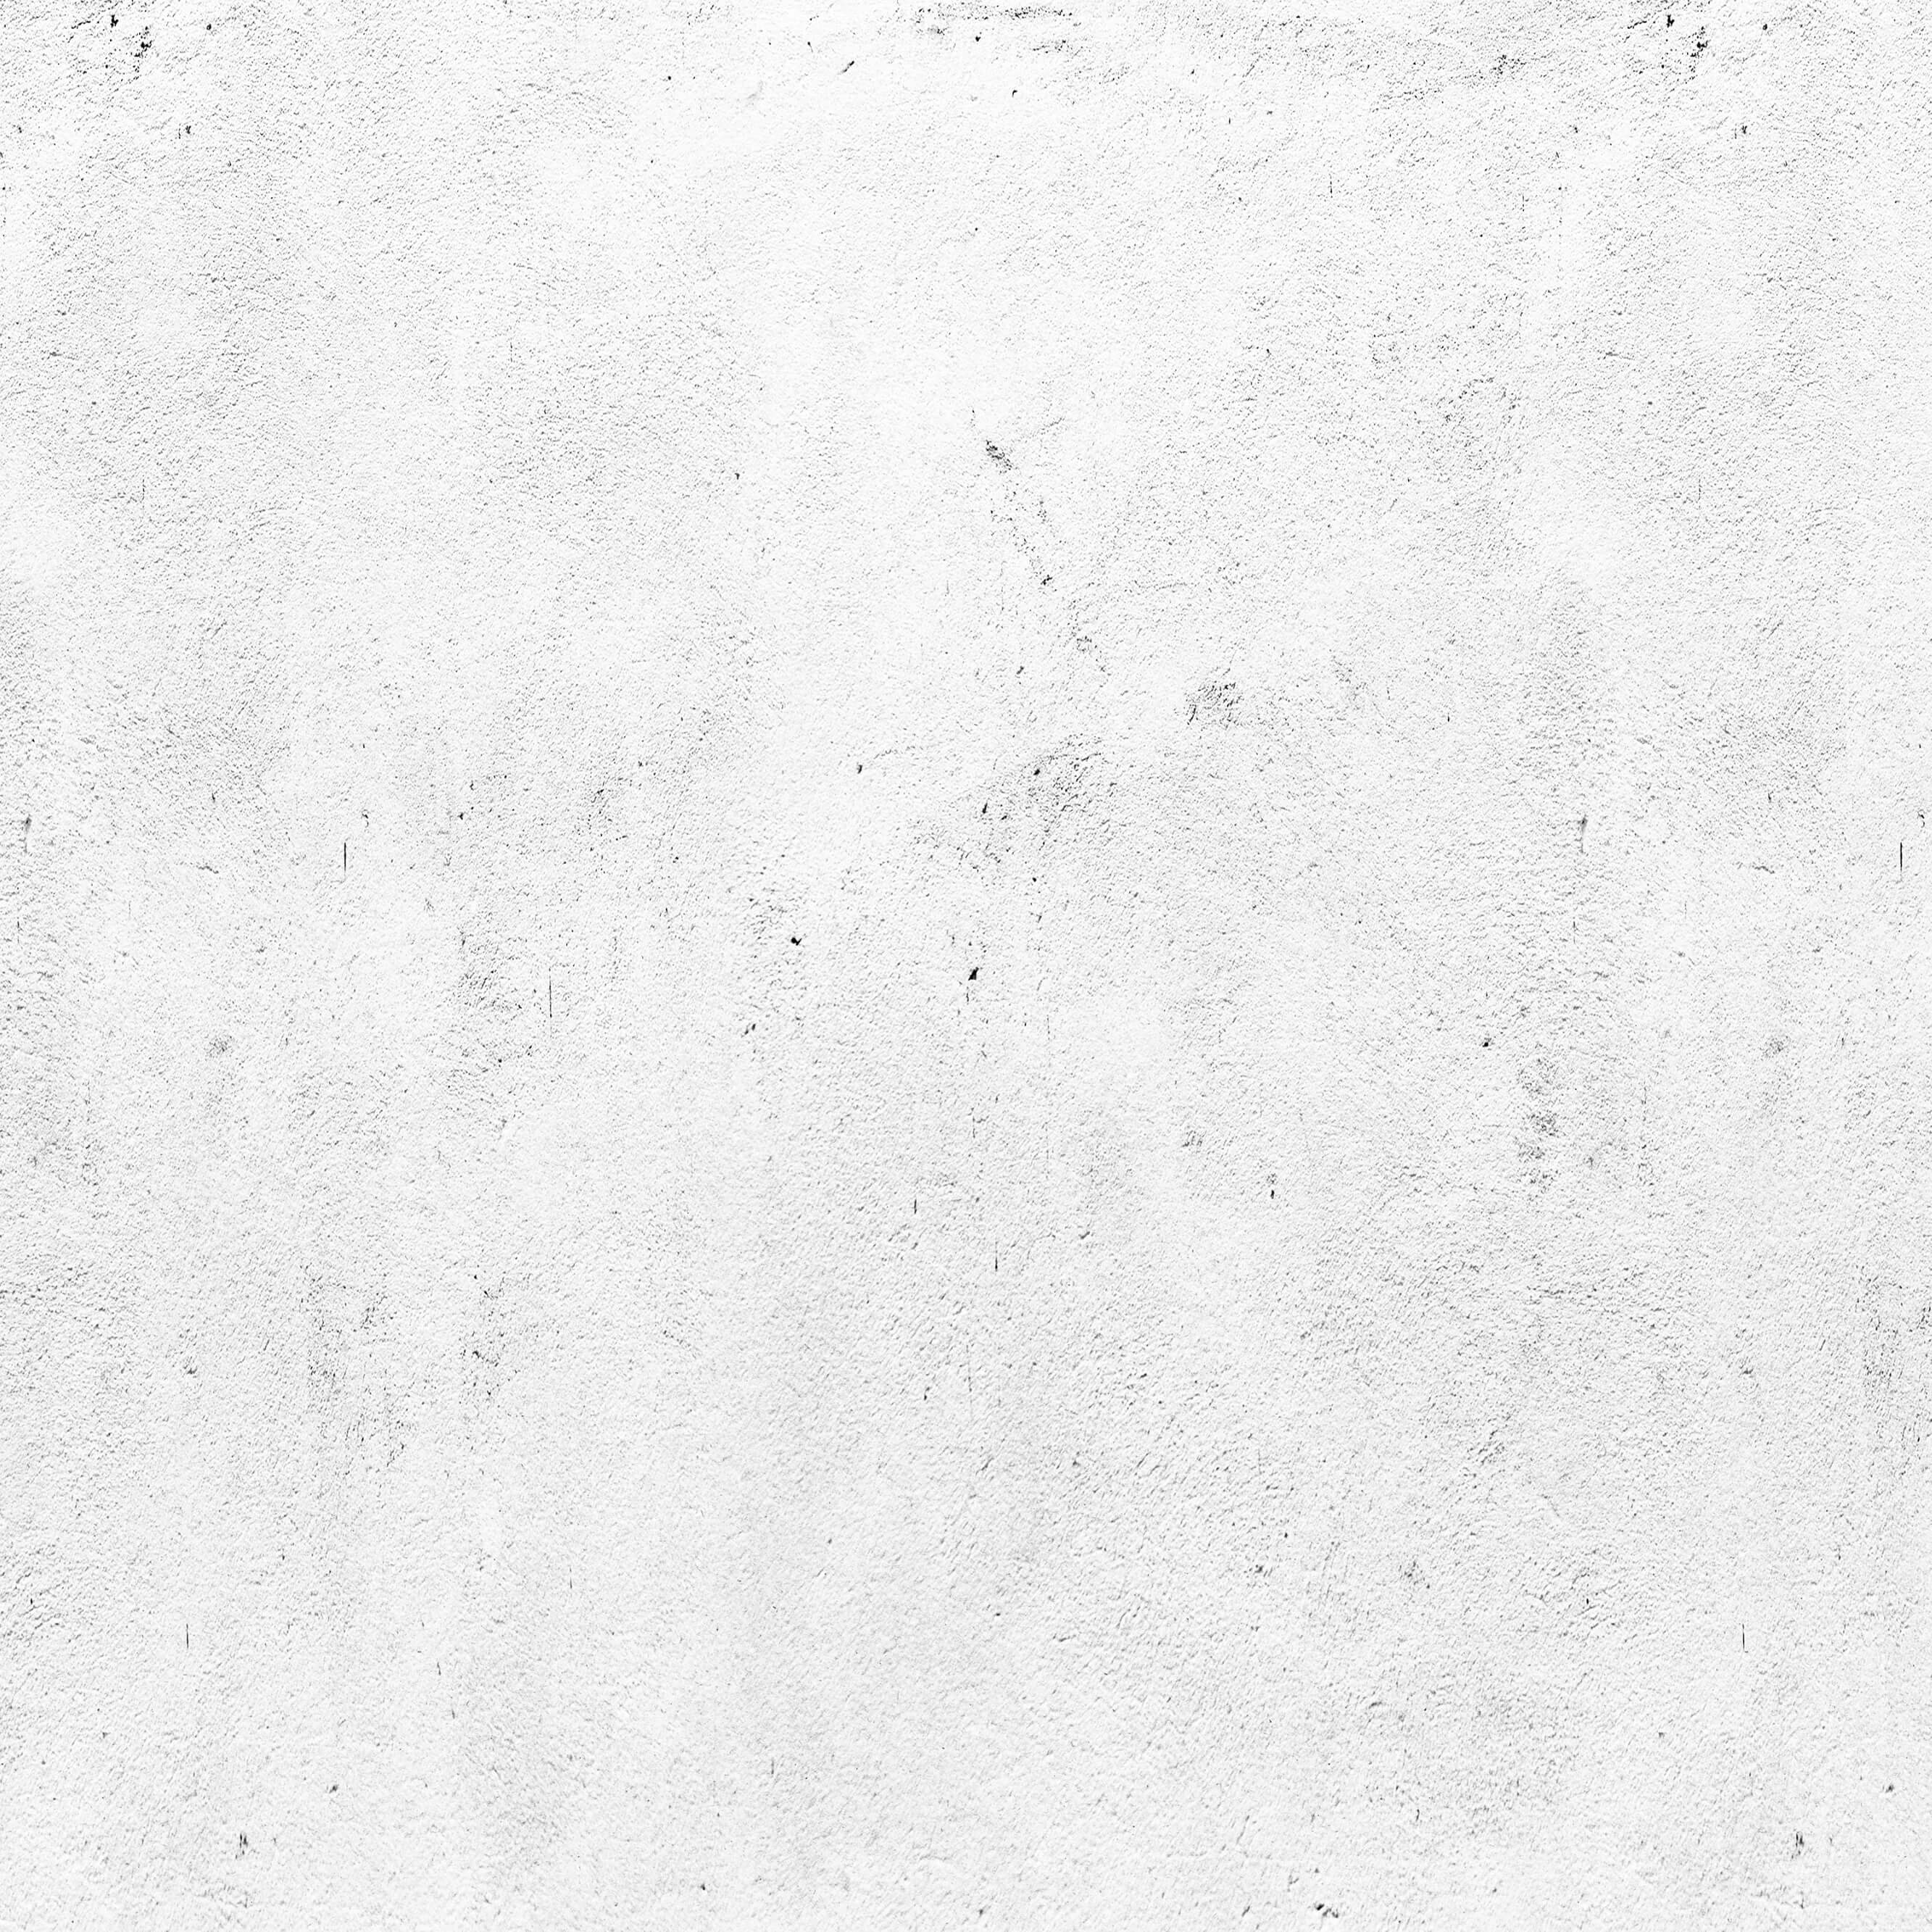 White Background Images Hd For Social A - Infoupdate.org